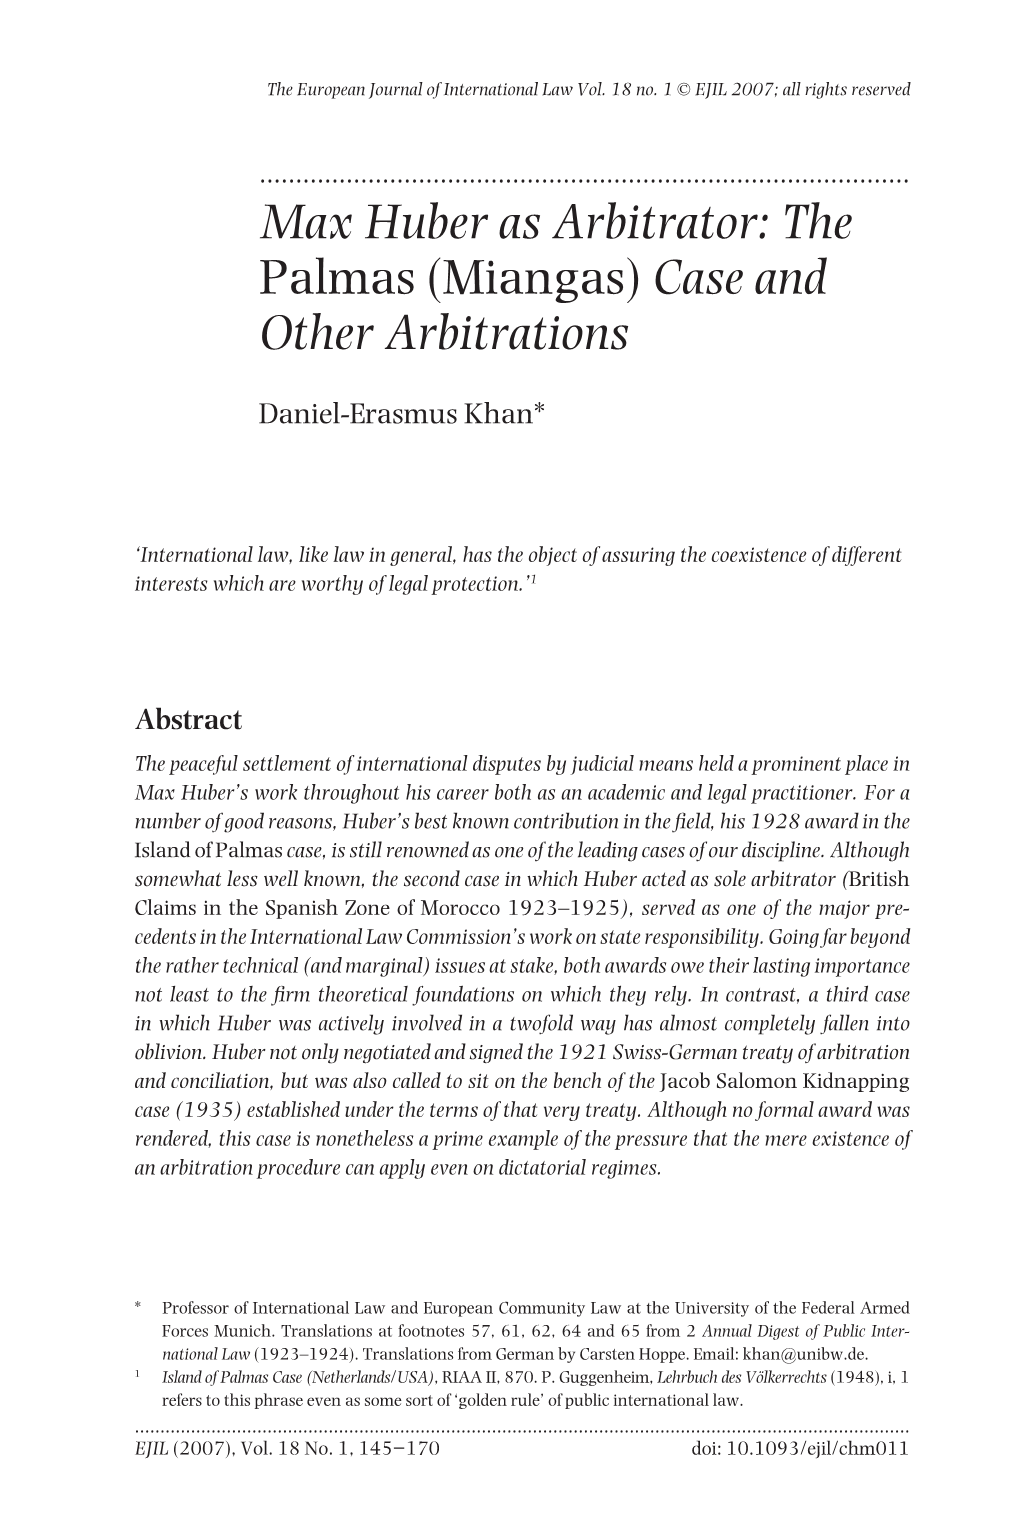 Max Huber As Arbitrator: the Palmas (Miangas) Case and Other Arbitrations